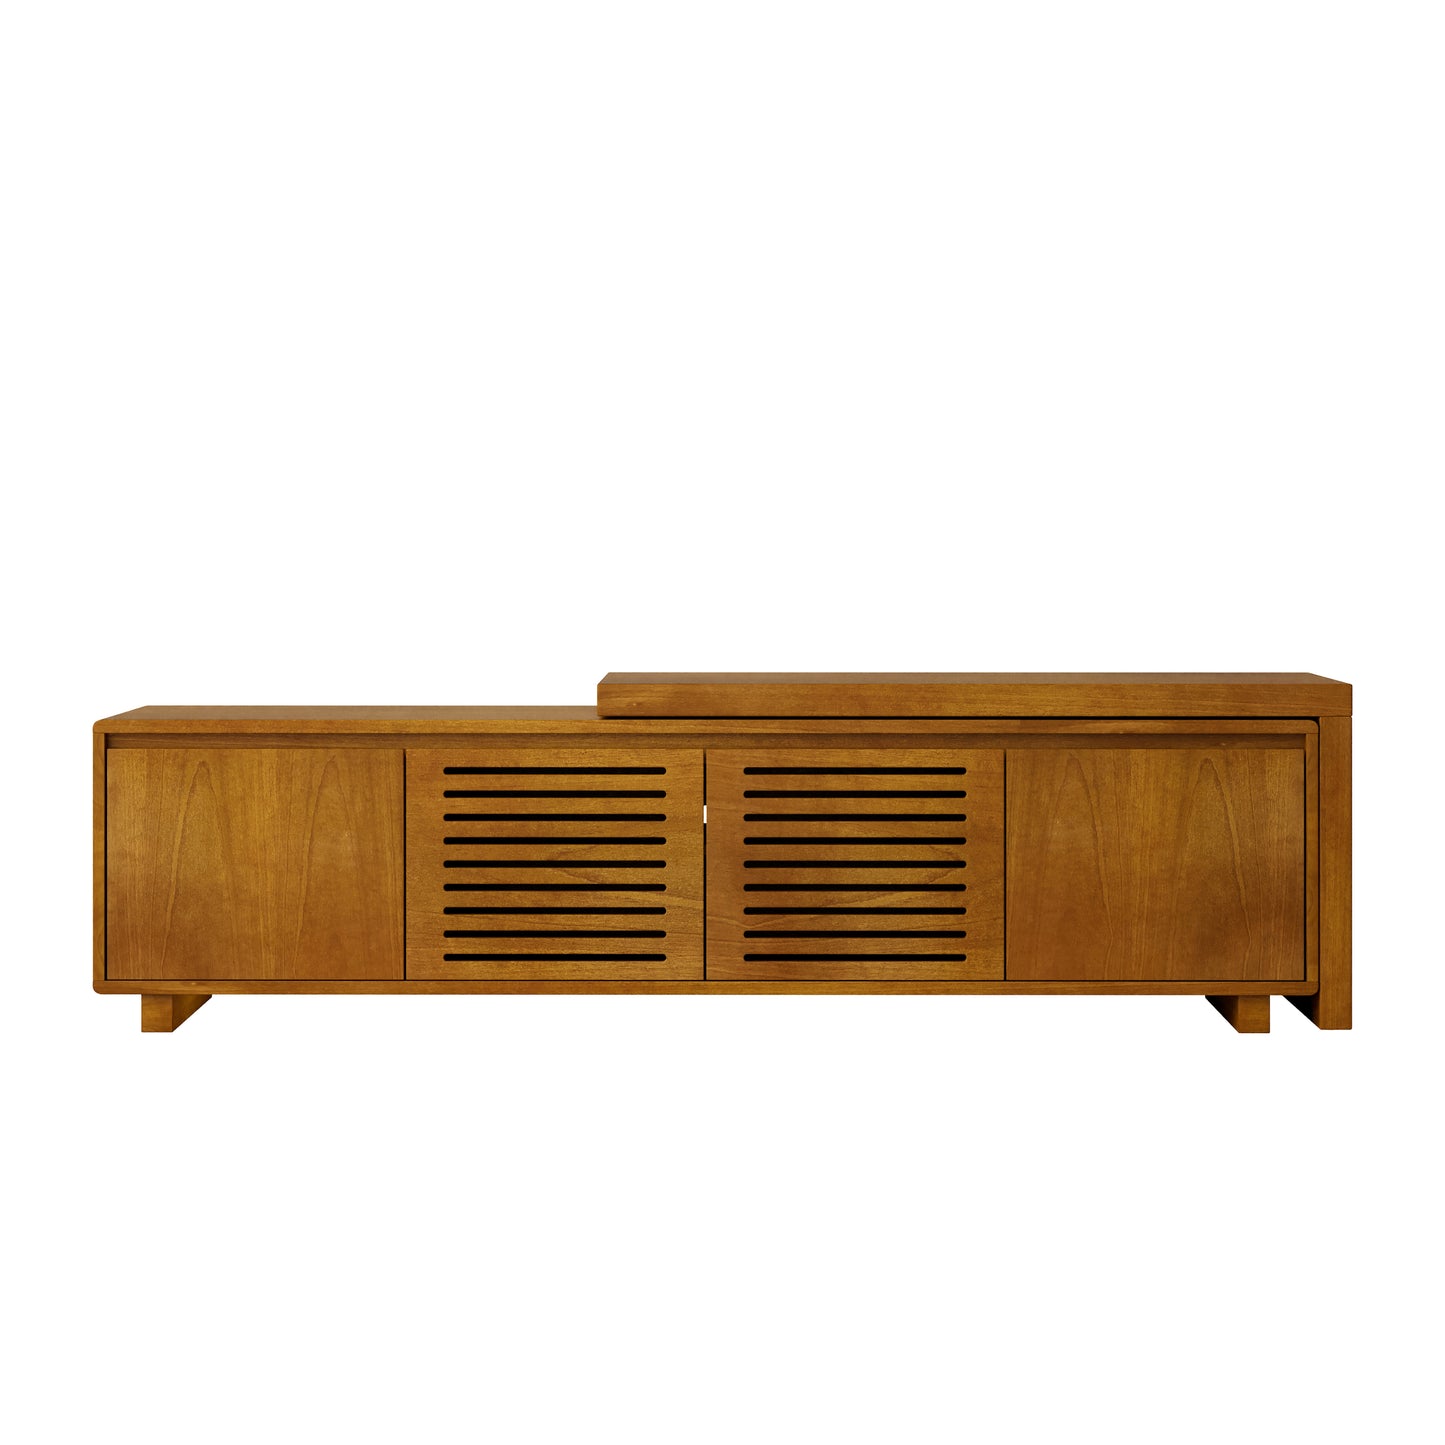 63" Mid-Century Modern Extendable TV Stand